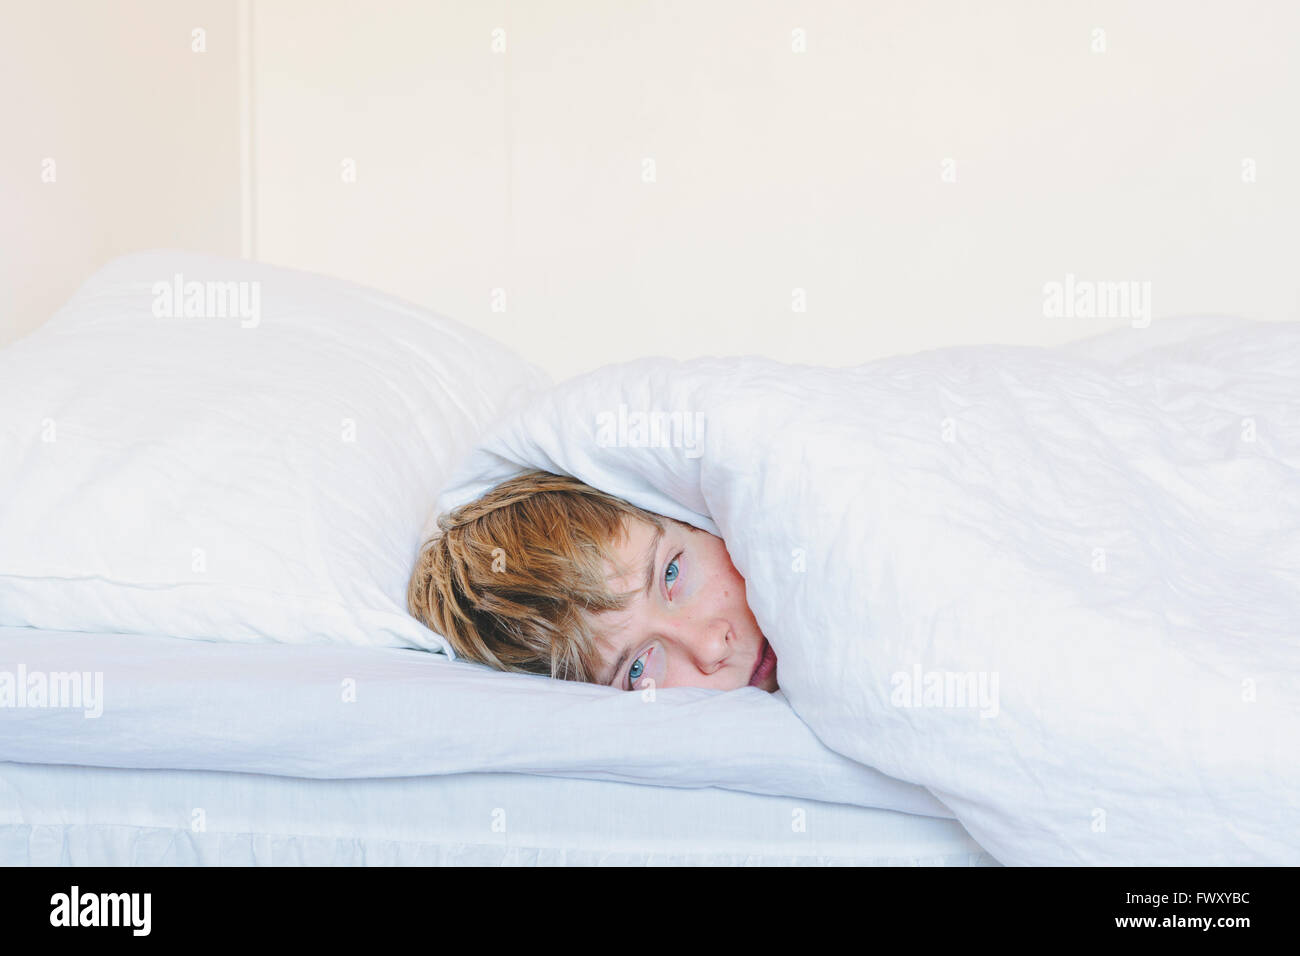 Finland, Helsinki, Portrait of young man lying in bed under white blanket Stock Photo